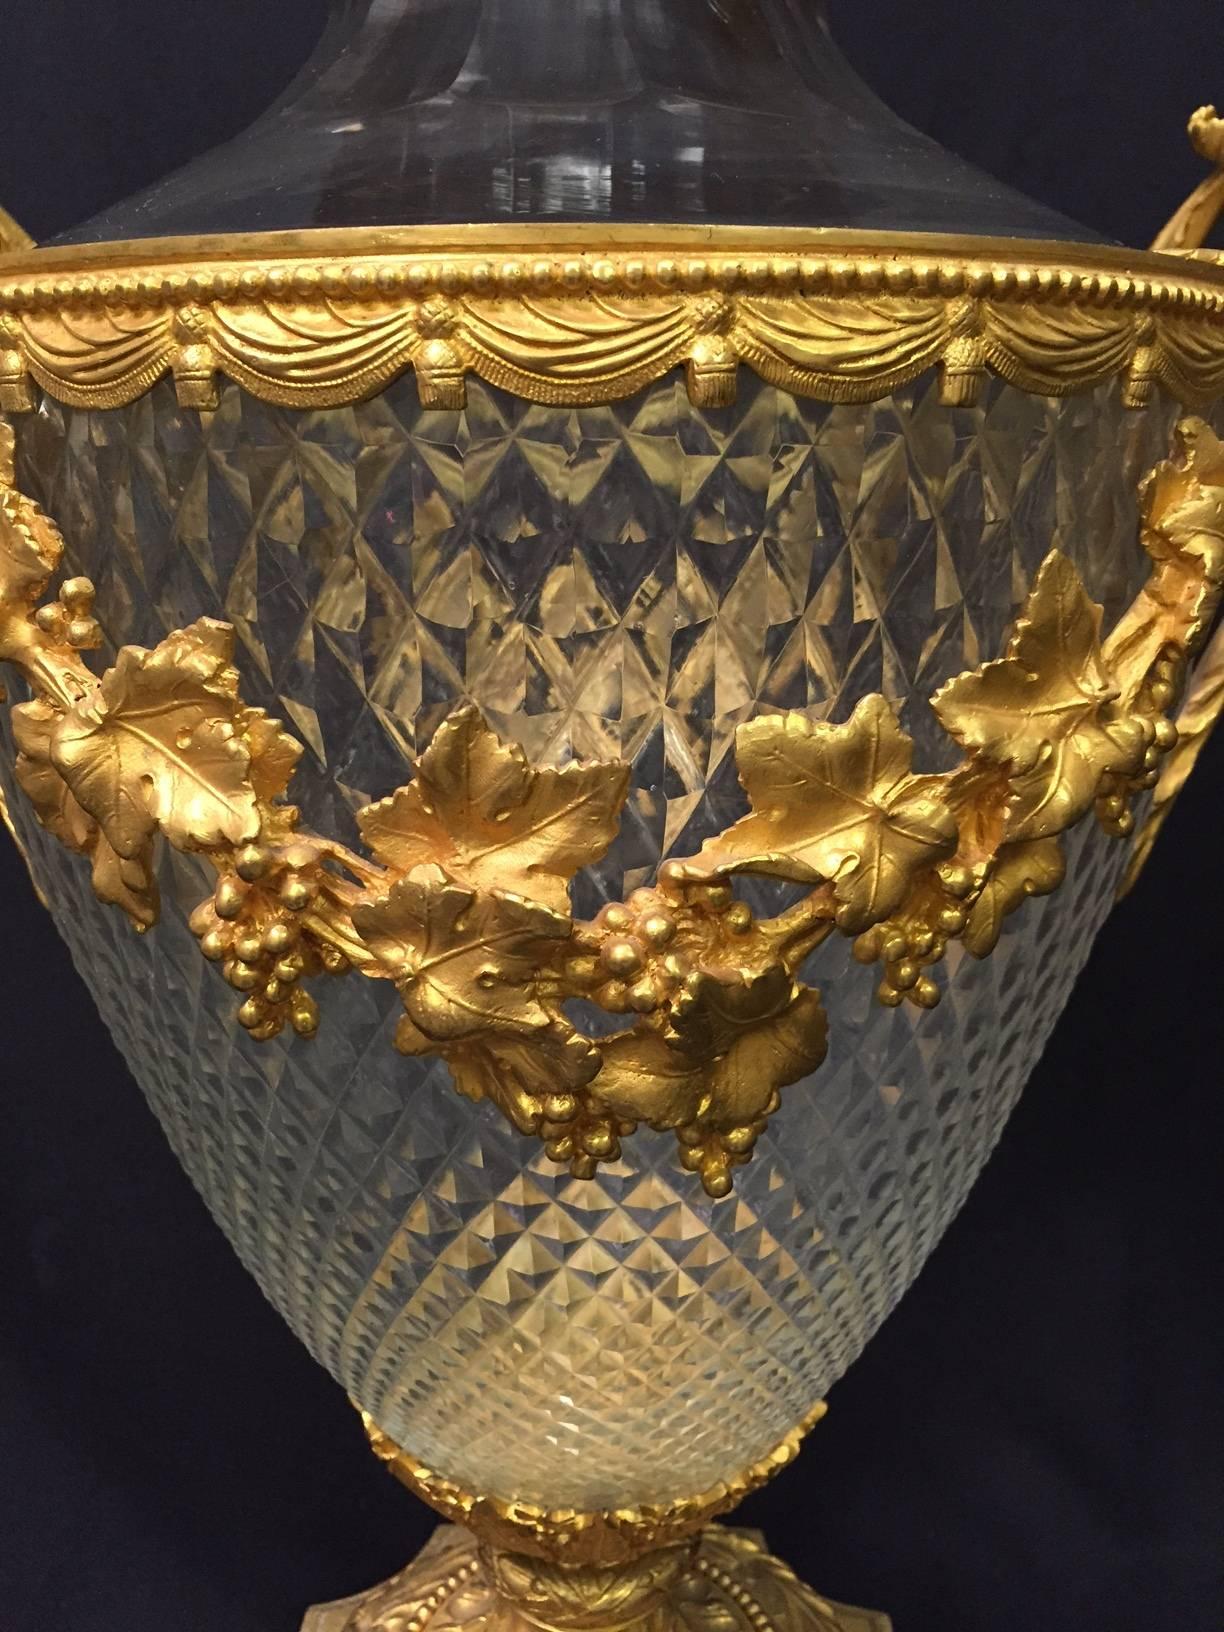 Large remarkable French ormolu-mounted and cut crystal covered urn. Topped with ormolu cover and large fruited finial on cut crystal urn mounted with fruit and leaf swags and handles, on fluted base inset in a wreath over a plinth.

The